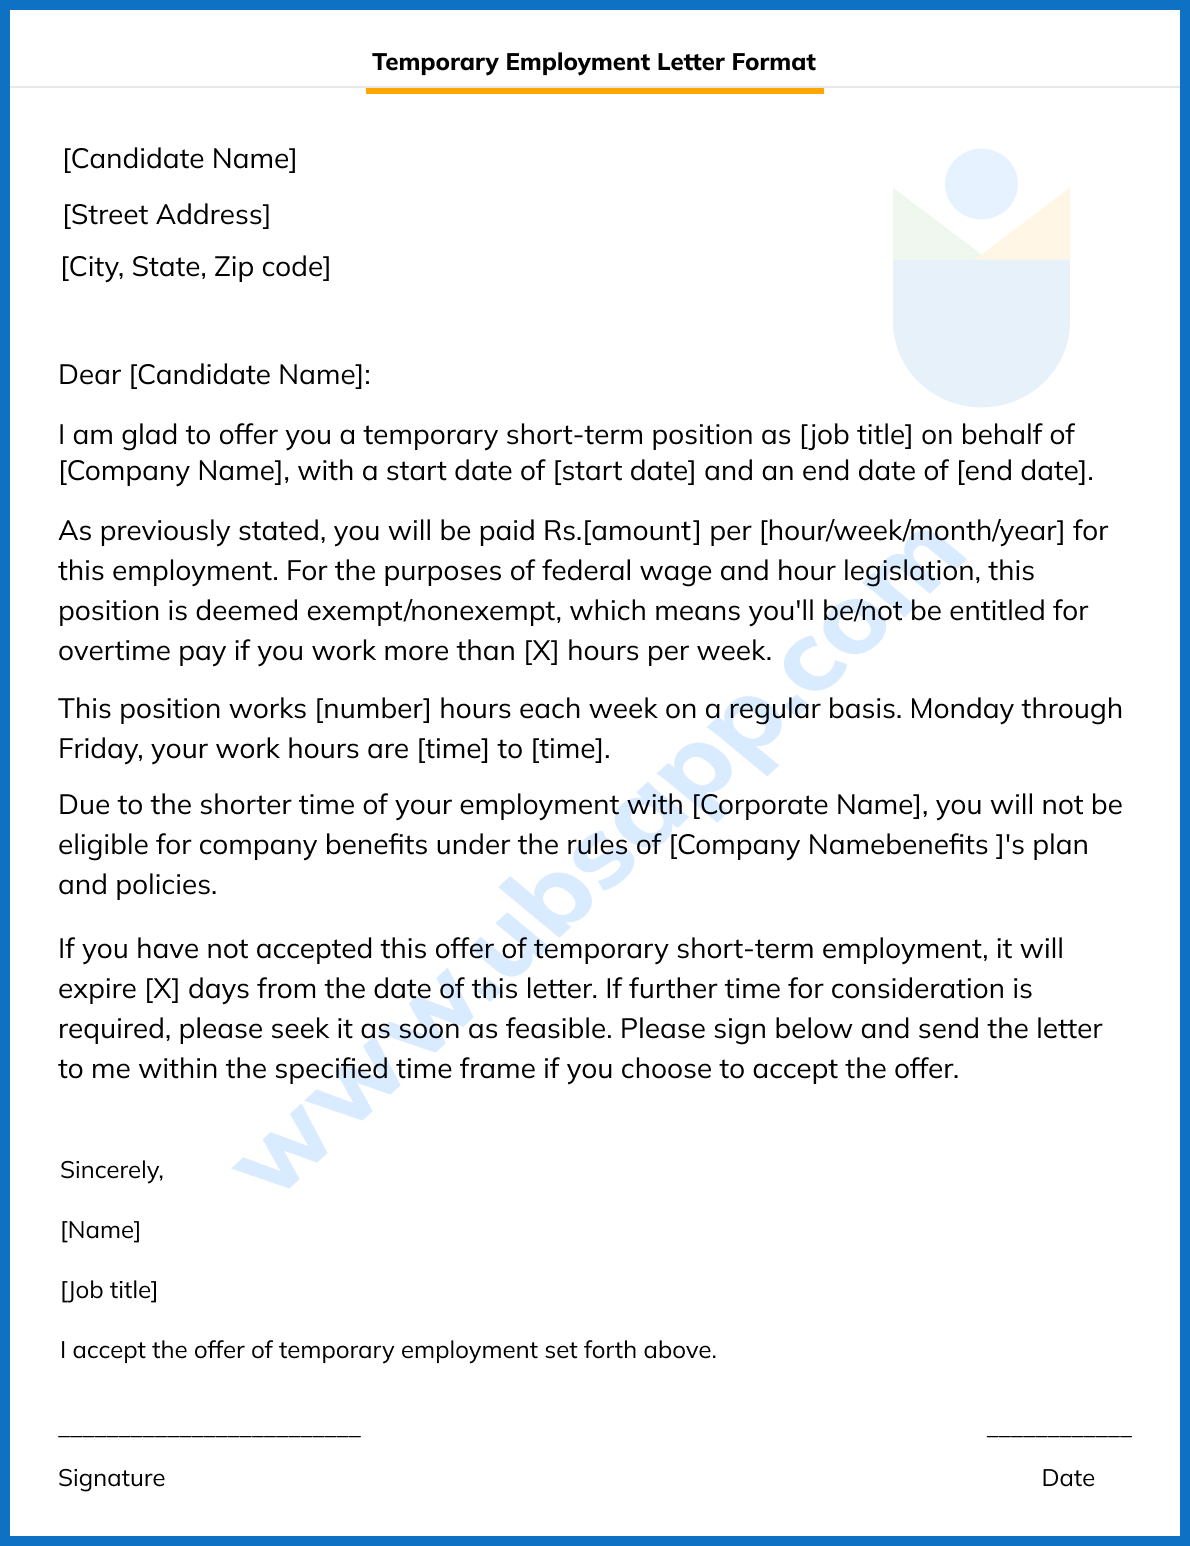 Temporary Employment Letter Format